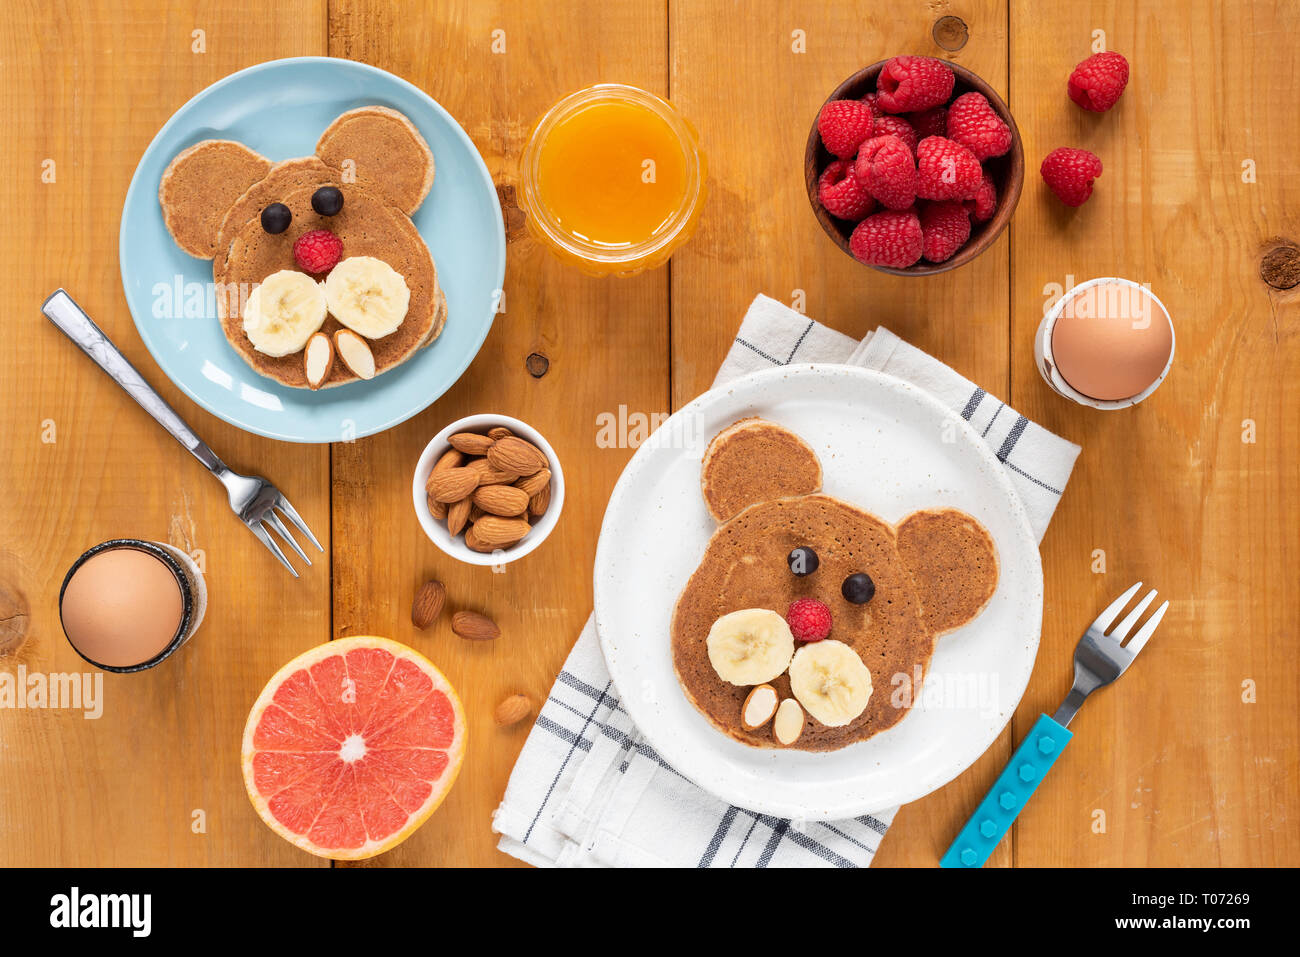 Funny pancakes foor art for kids. Healthy breakfast Table top view on a wooden table. Walrus, dog or bear shaped pancakes decorated with fruits and be Stock Photo